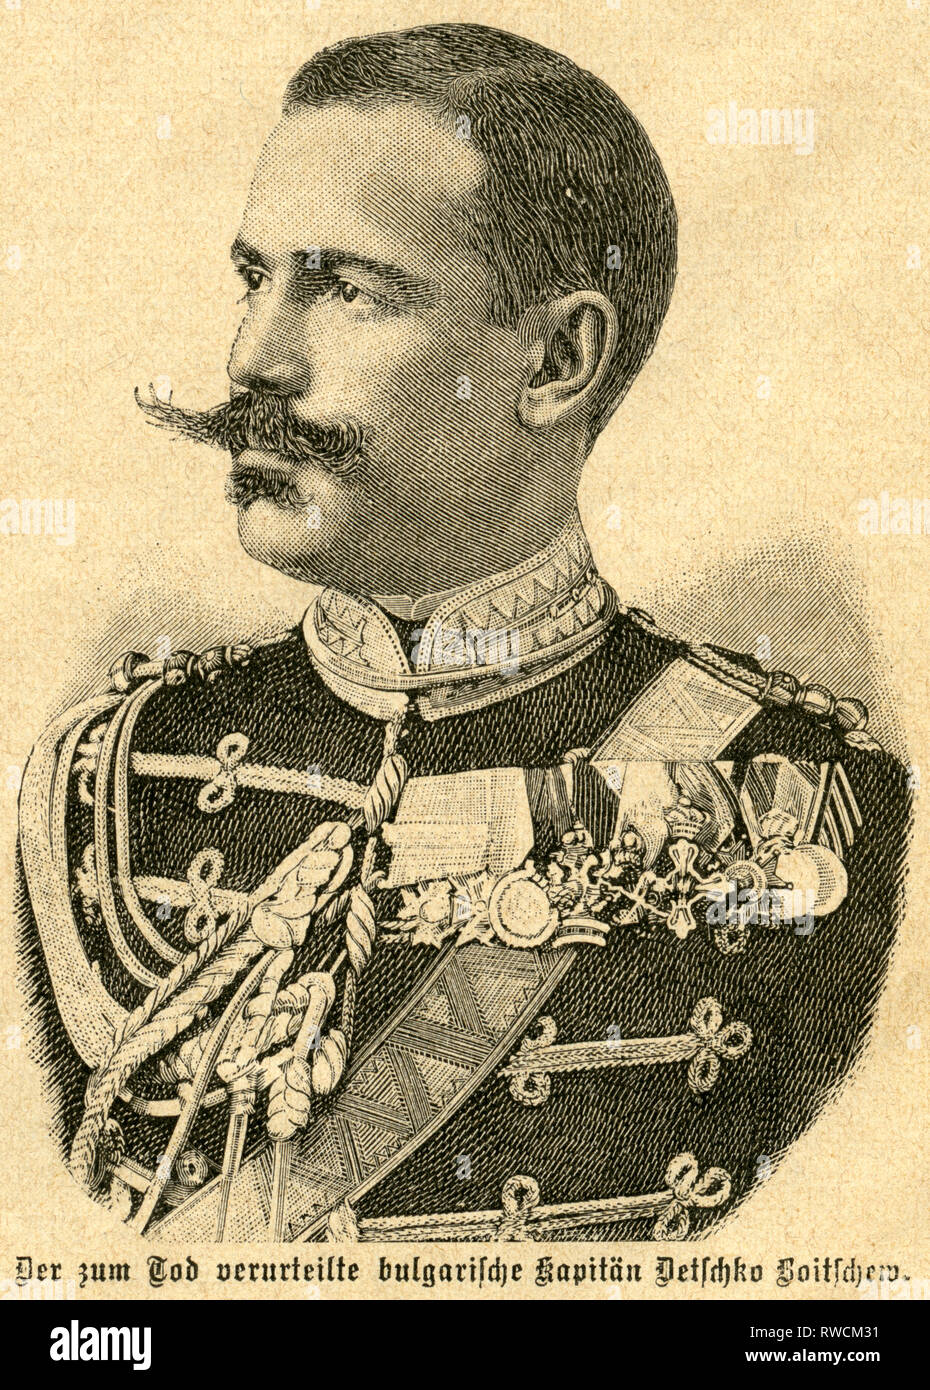 Bulgarian, Sofia, captain of the bodyguard Detschko Boitschew, illustration from the magazin 'Alte und Neue Welt (old and new world), March, issue 7, 1897-1898, year 32., Additional-Rights-Clearance-Info-Not-Available Stock Photo